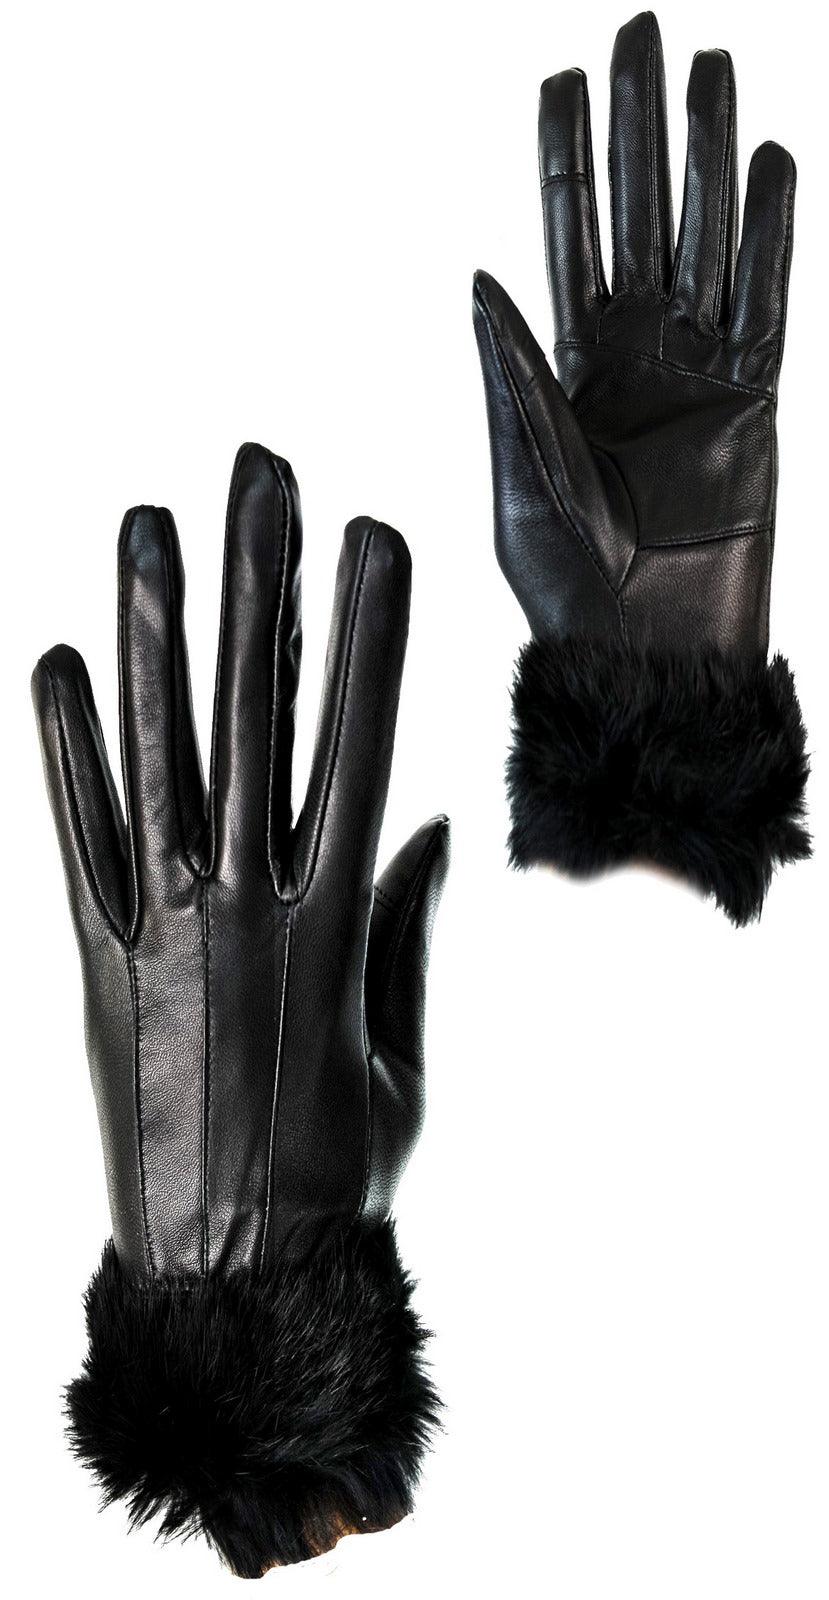 KK IWG 9020 Womens Real Leather Winter Gloves Fur Fleece Lined Warm Ladies Gift Touch Screen-TruClothing